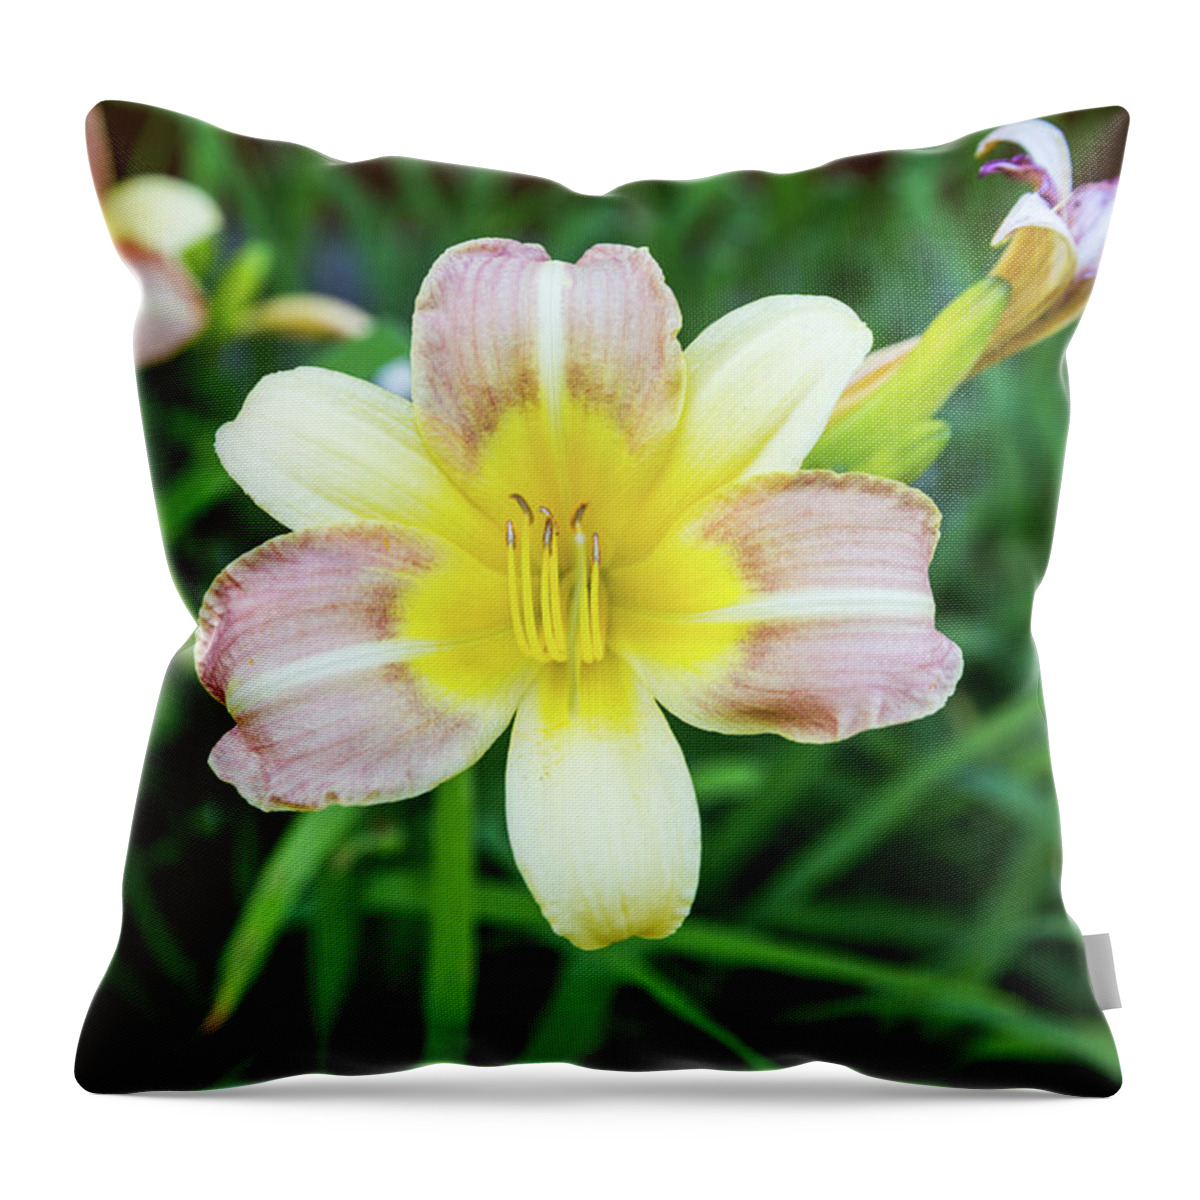 Daylily Throw Pillow featuring the photograph Yellow Daylily by D K Wall